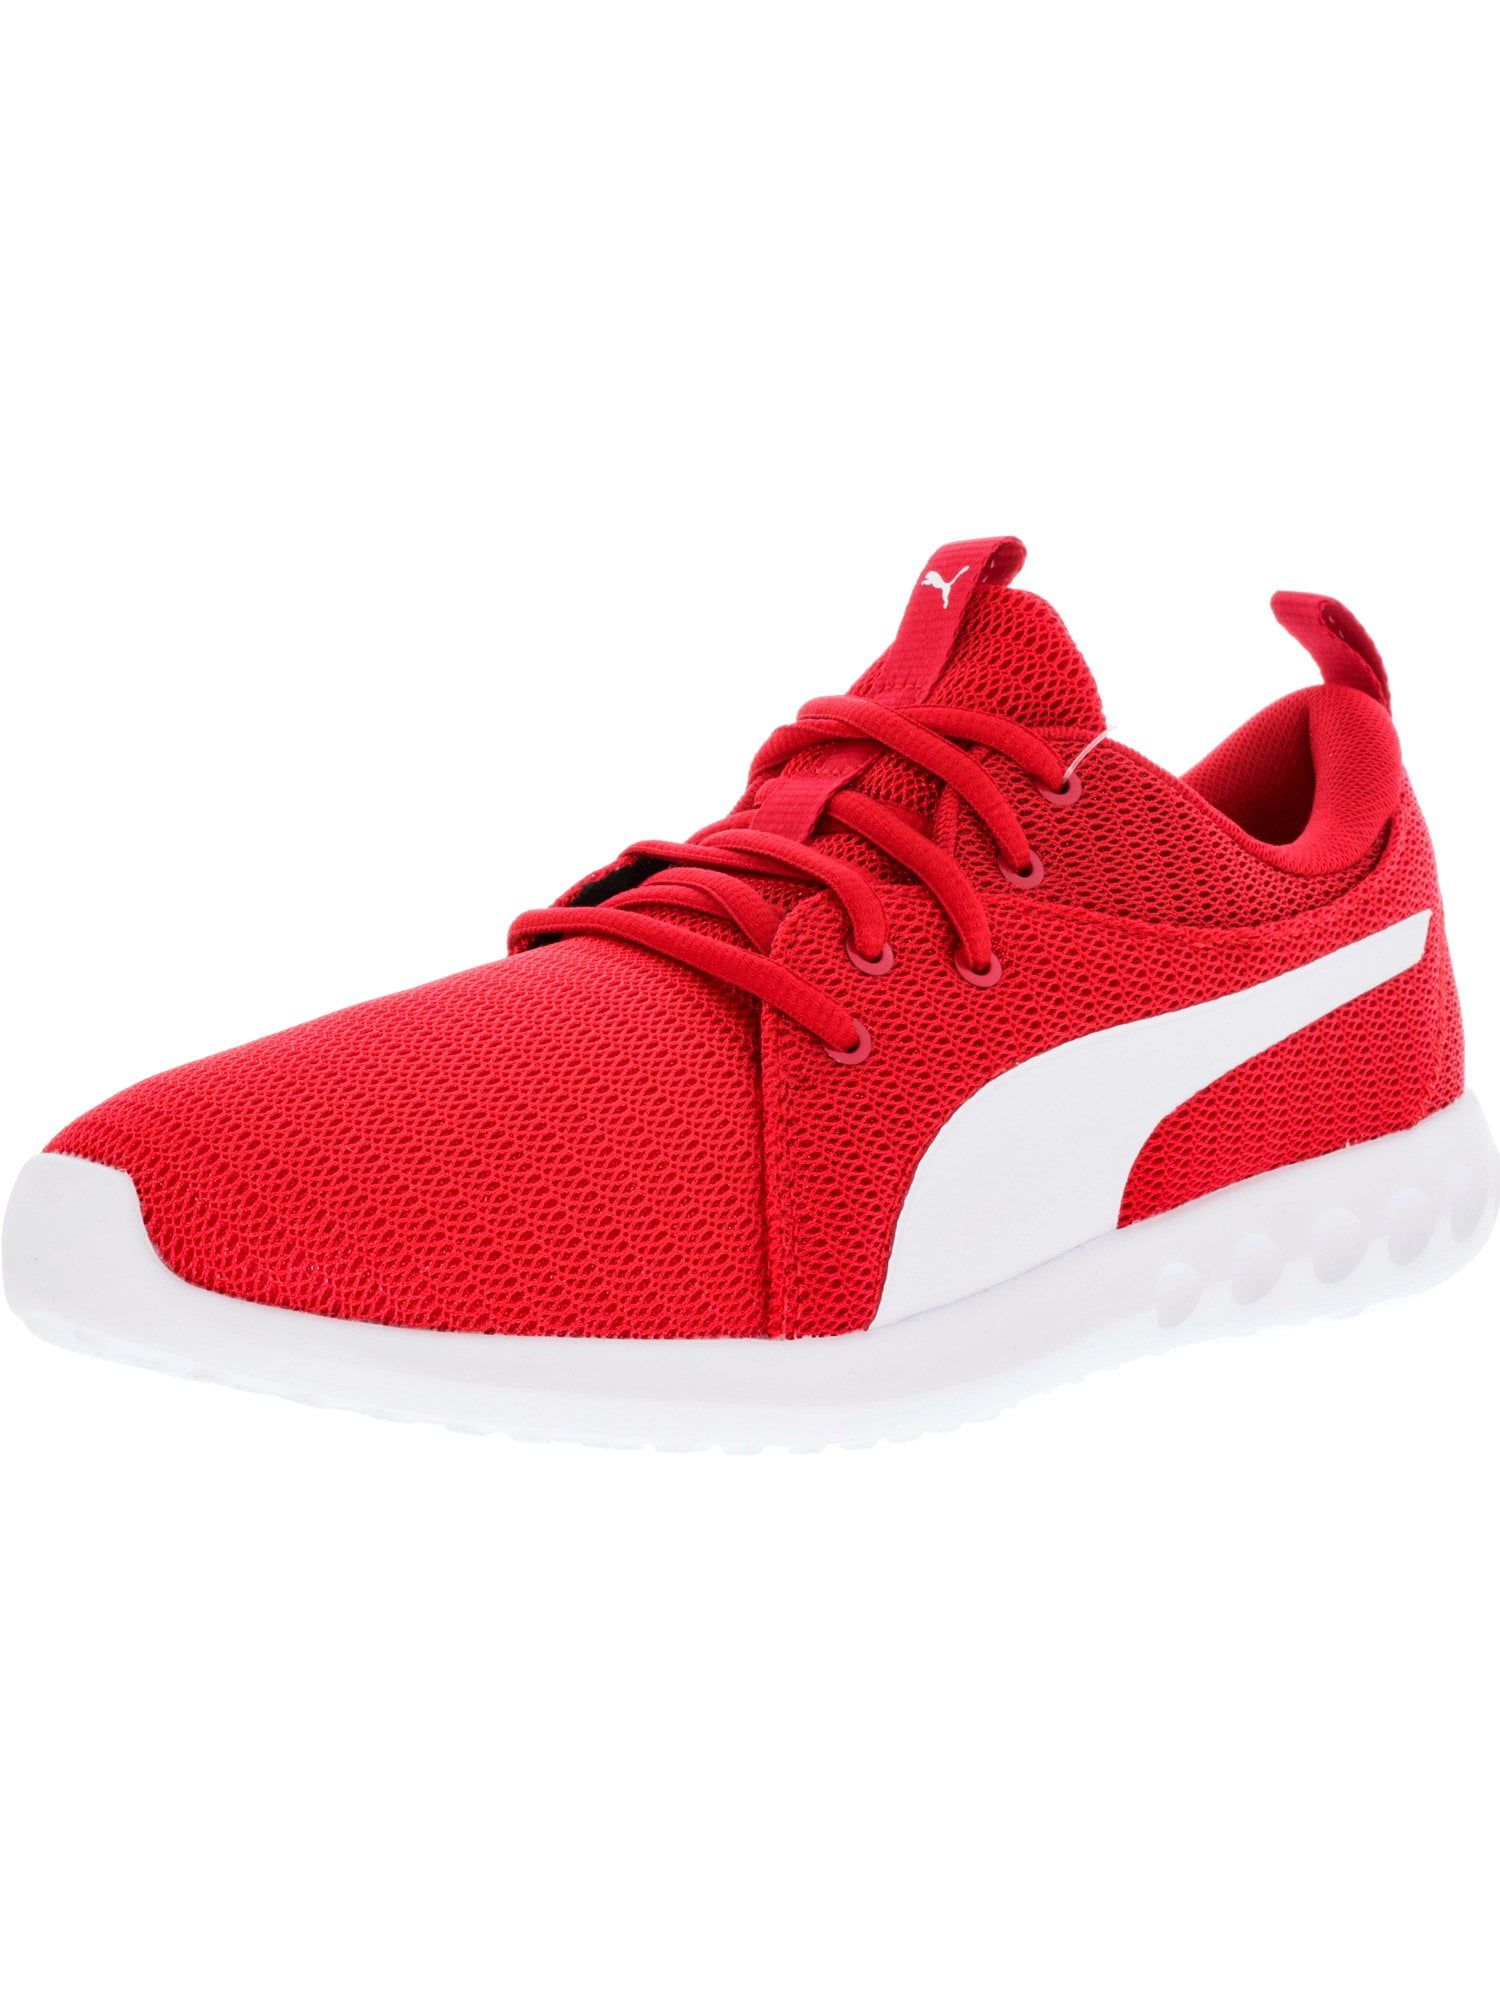 Puma Carson 2 Red Online Sale, UP TO 64 